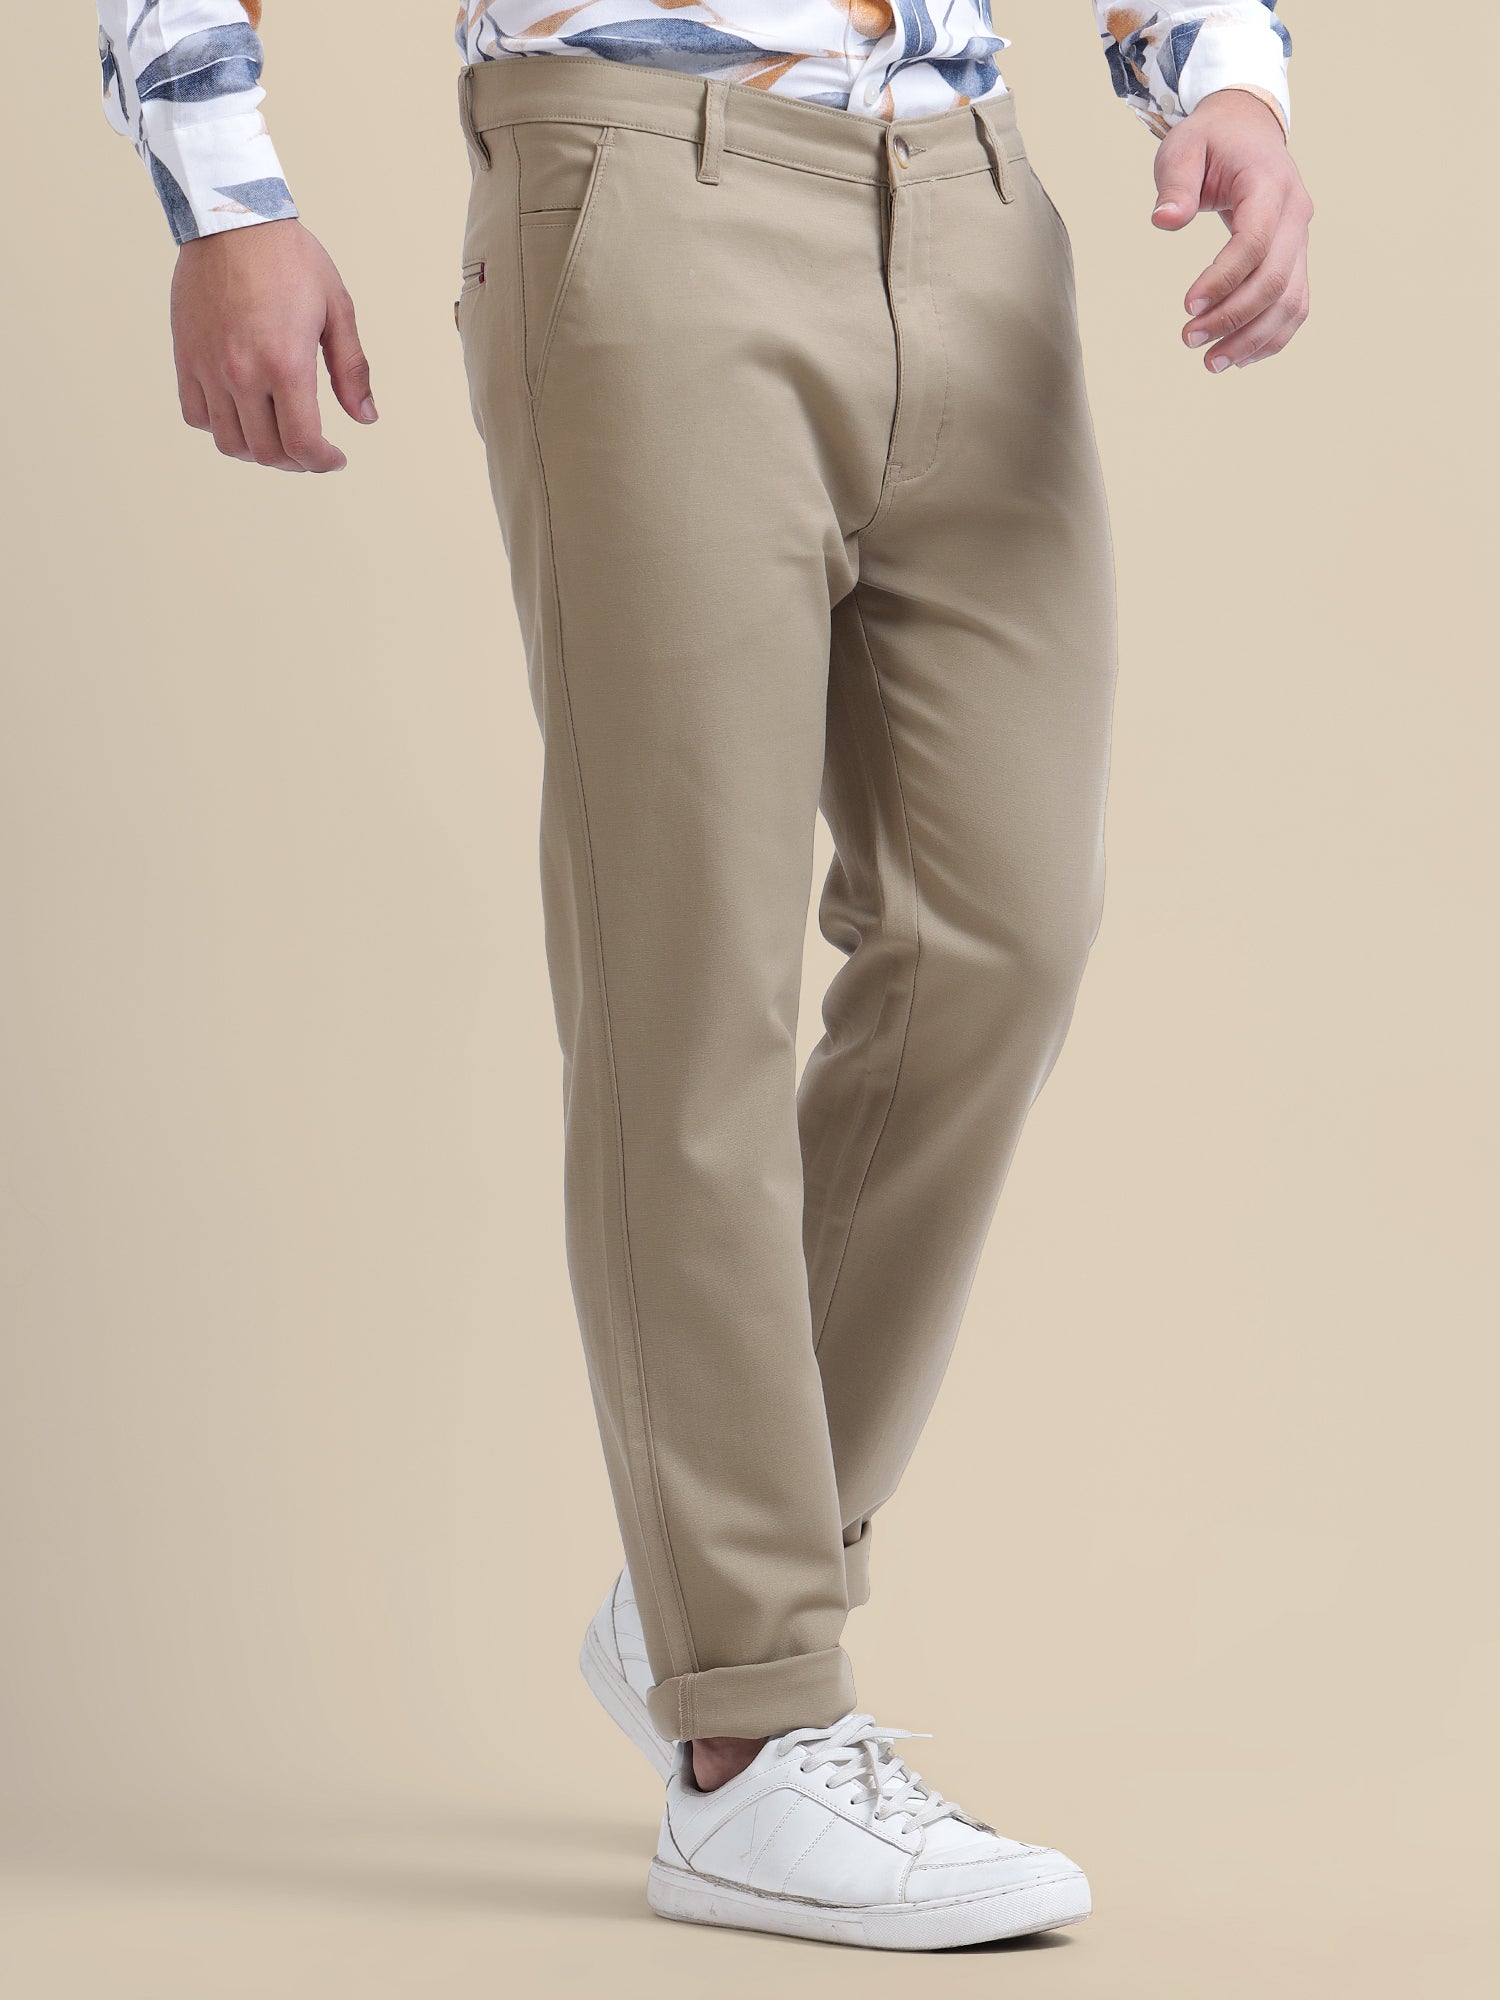 Beige Casual Trousers  Solid Cotton Lycra Smart Fit